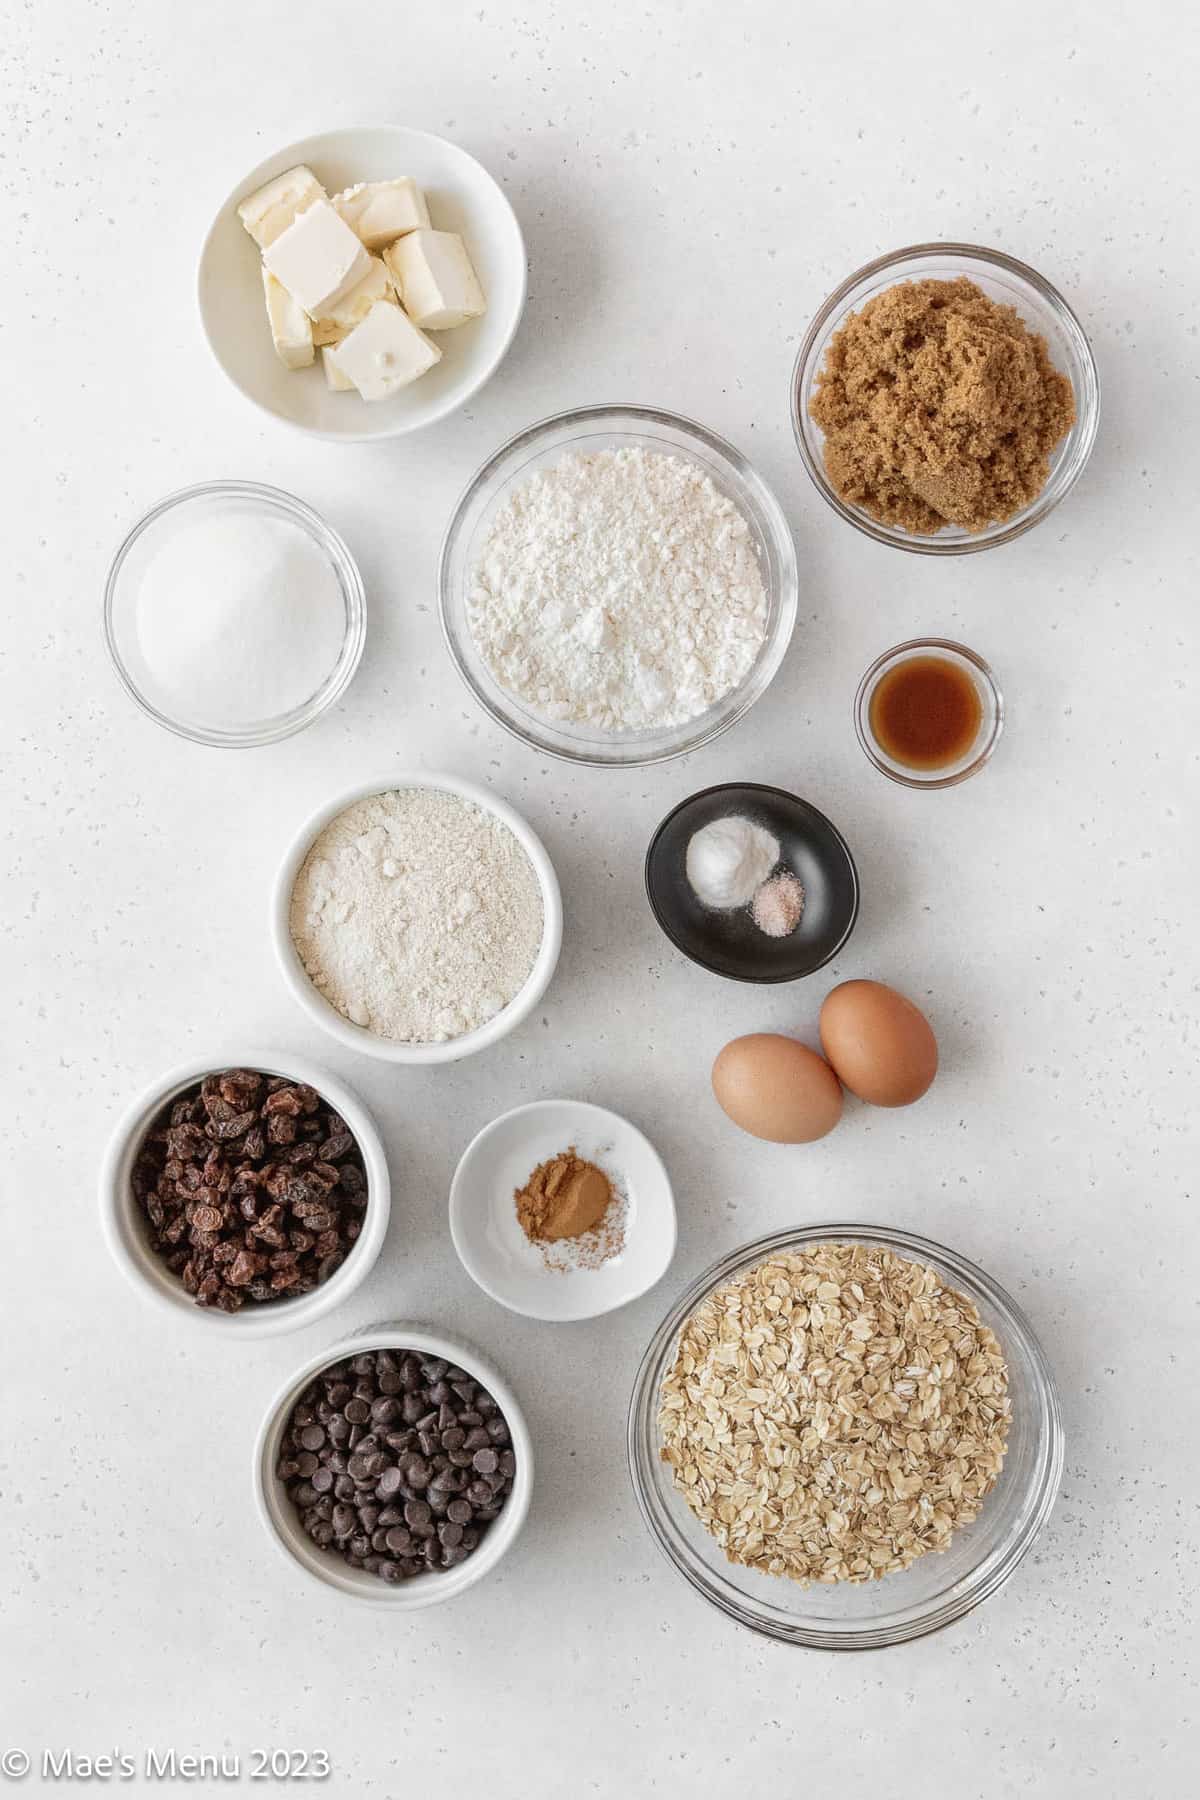 All of the ingredients for oatmeal raisin chocolate chip cookies on a white background.